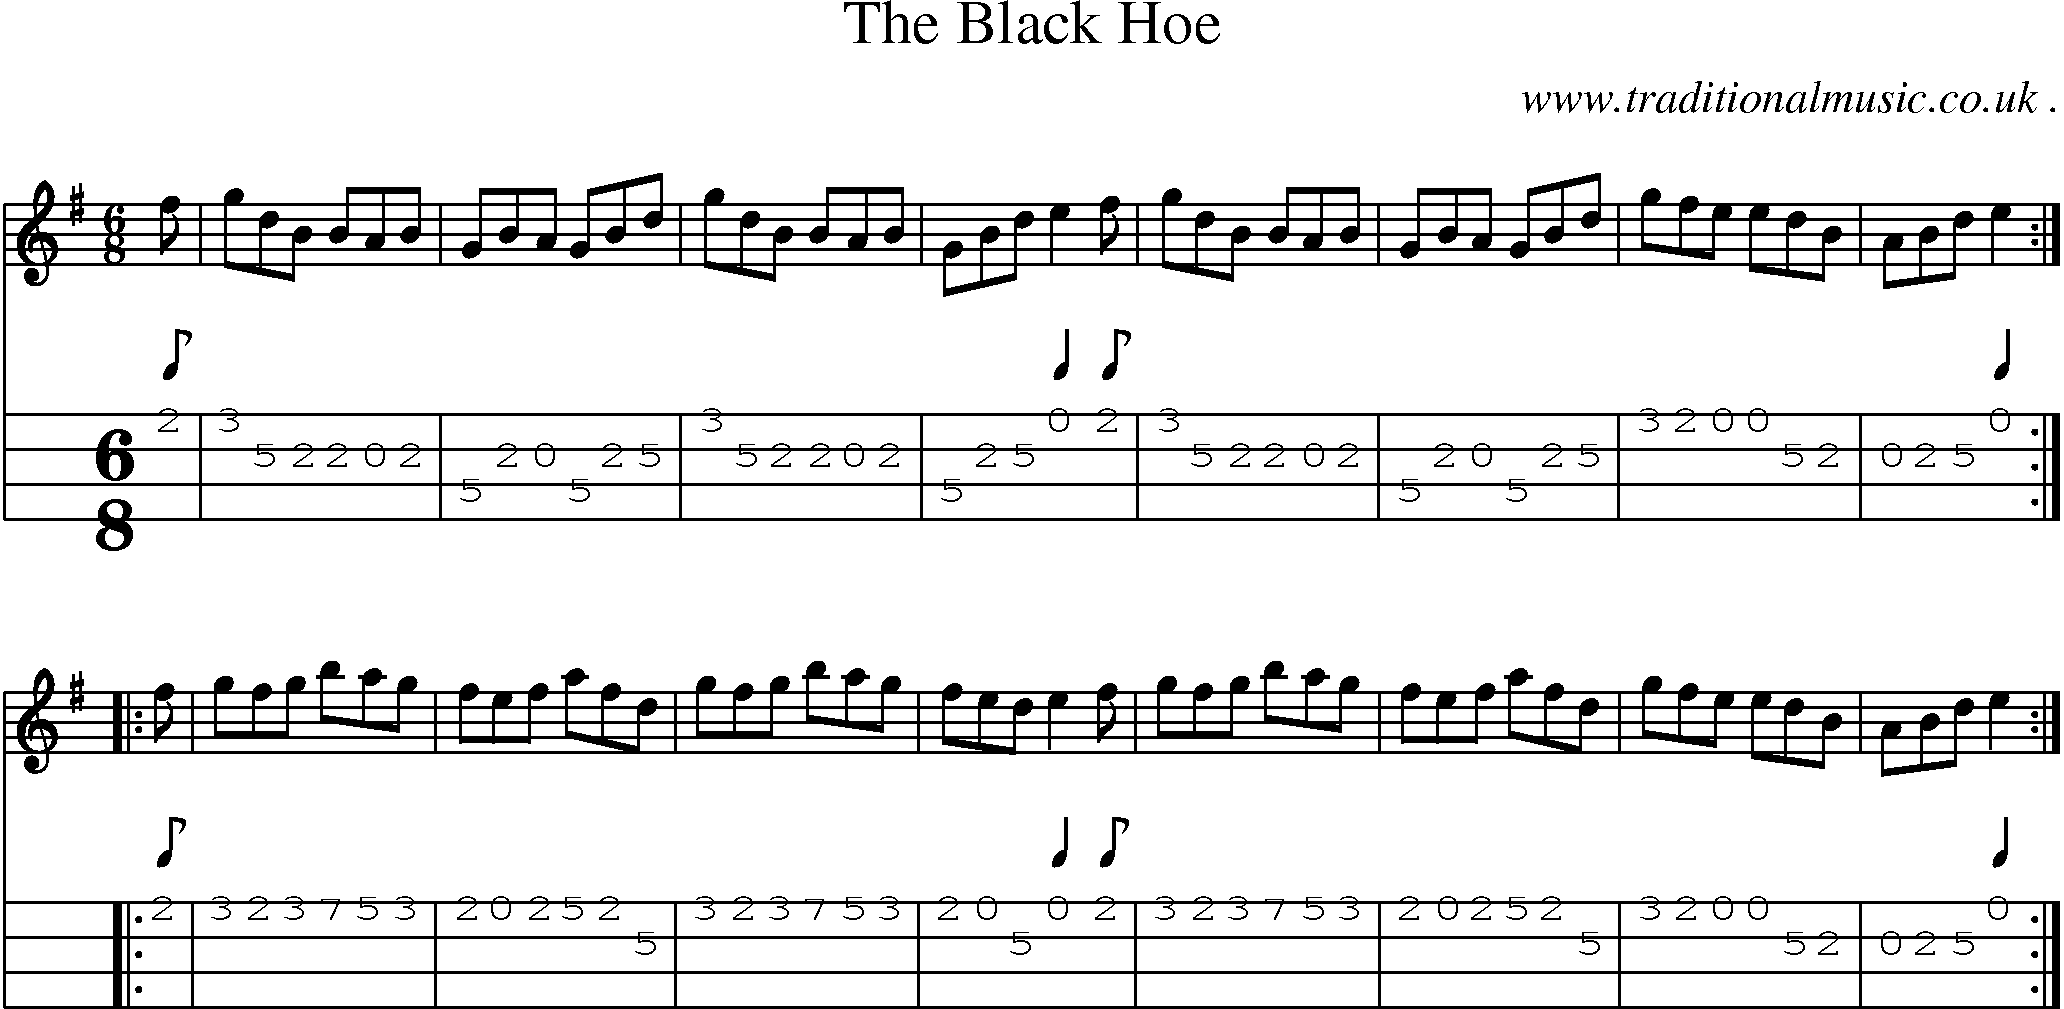 Sheet-music  score, Chords and Mandolin Tabs for The Black Hoe